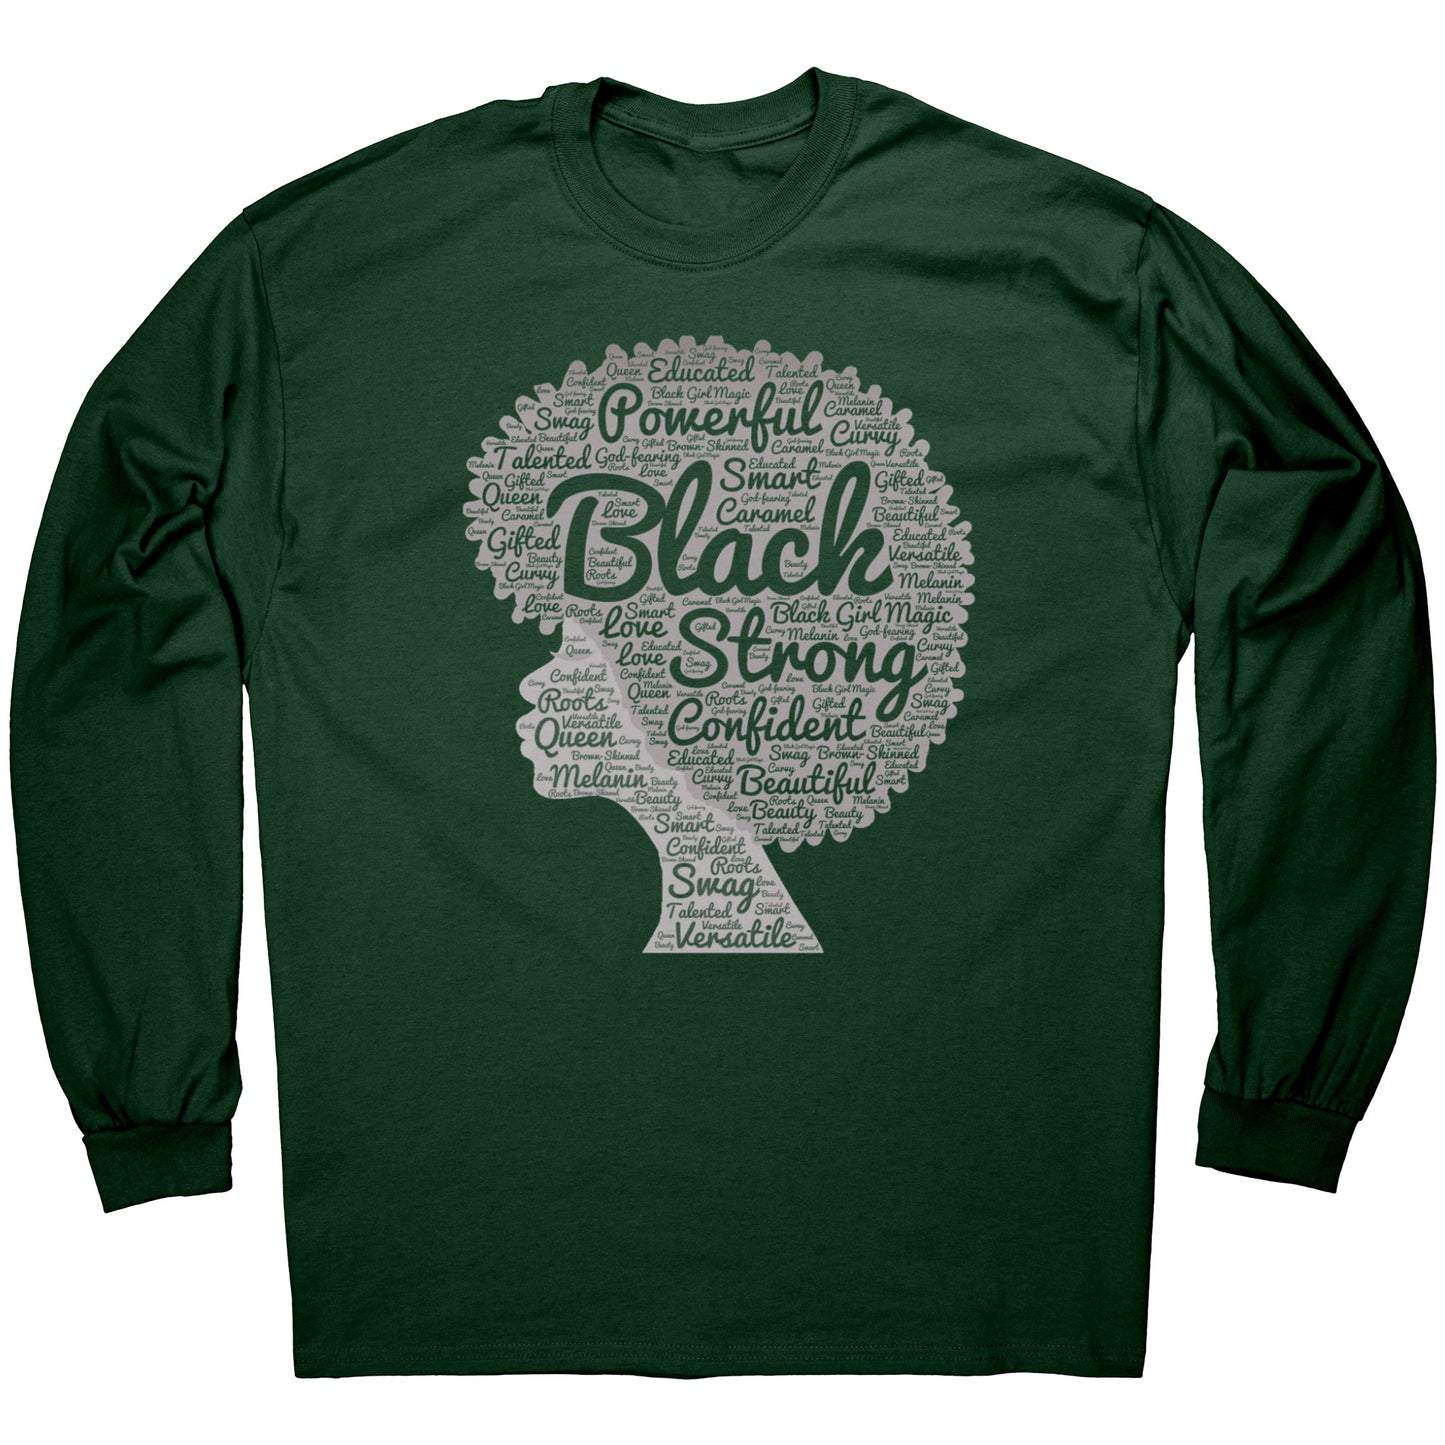 Black and Strong Long Sleeve T-Shirt